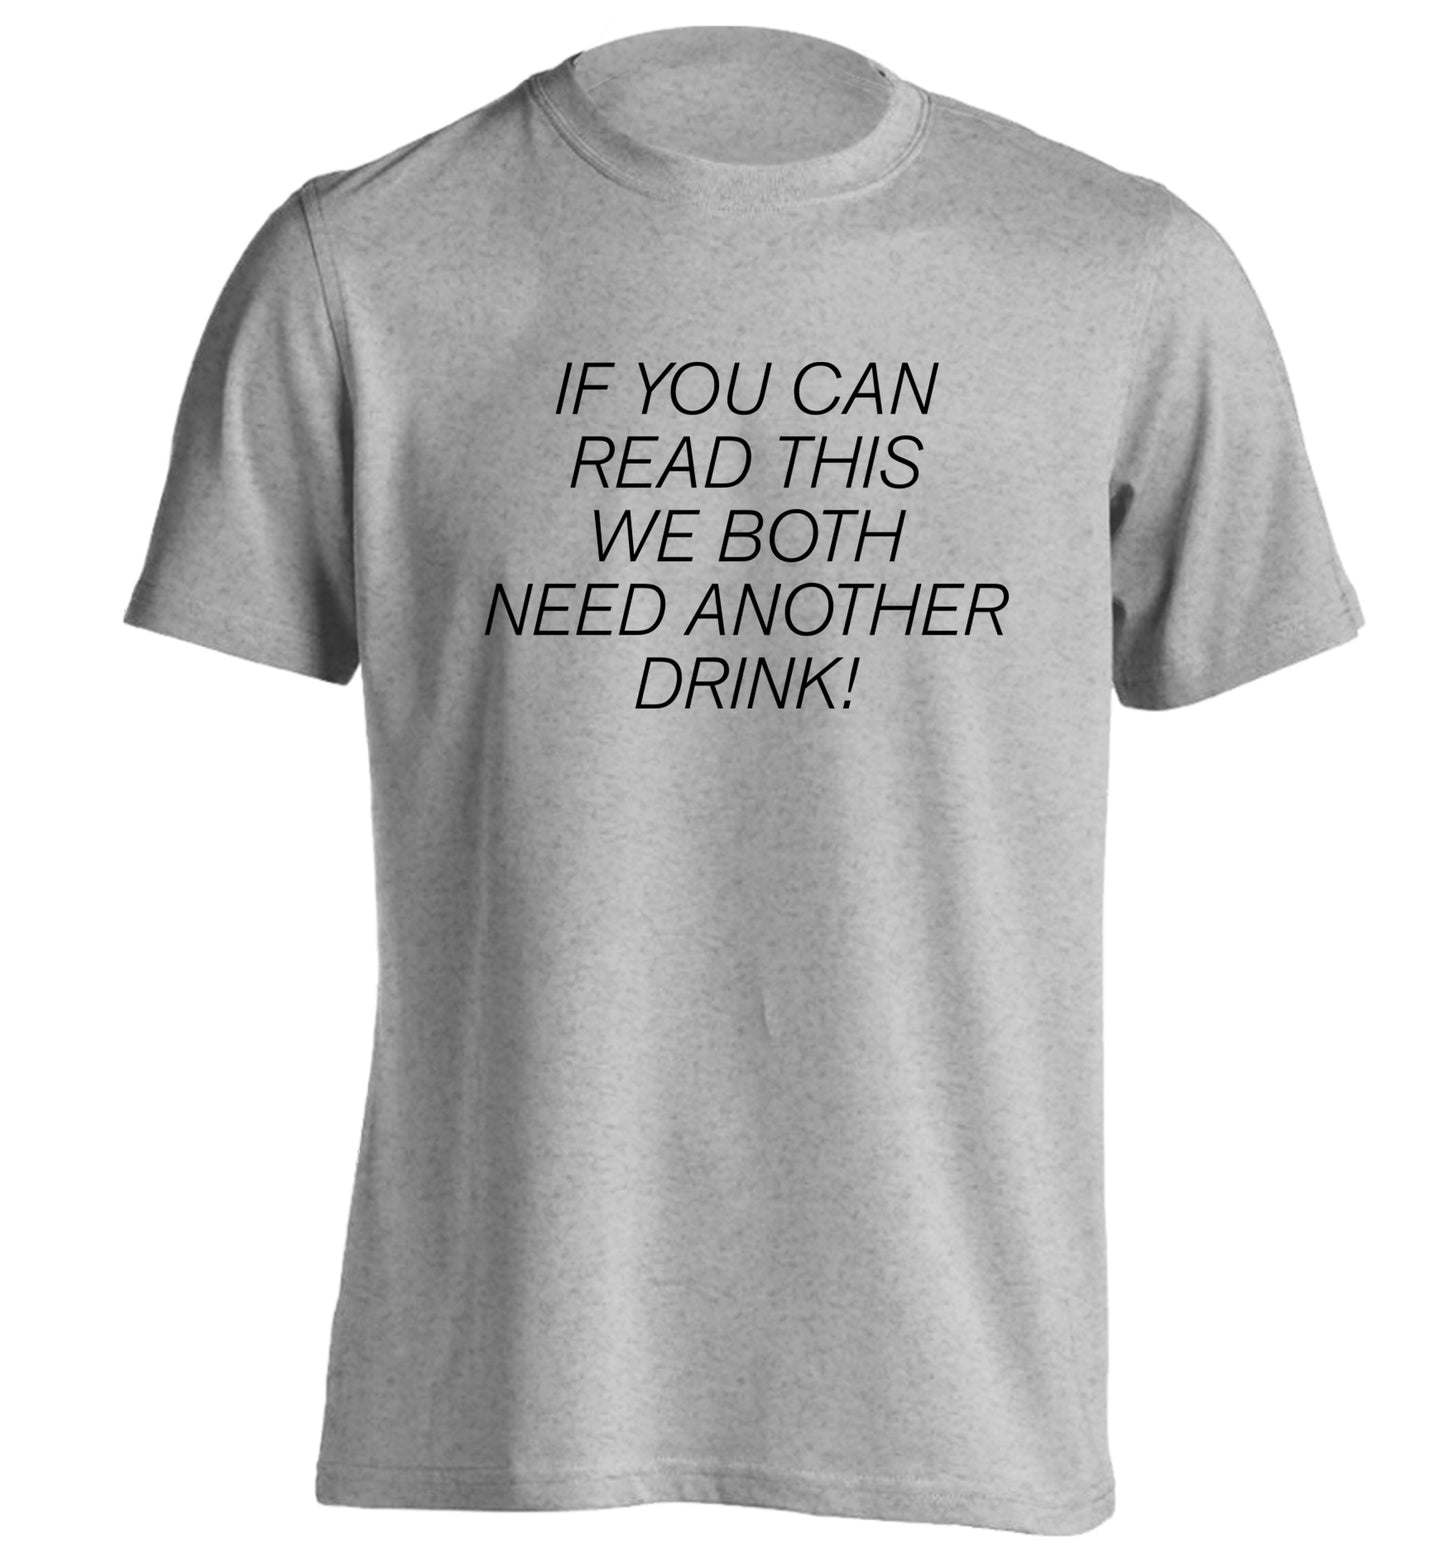 If you can read this we both need another drink! adults unisex grey Tshirt 2XL